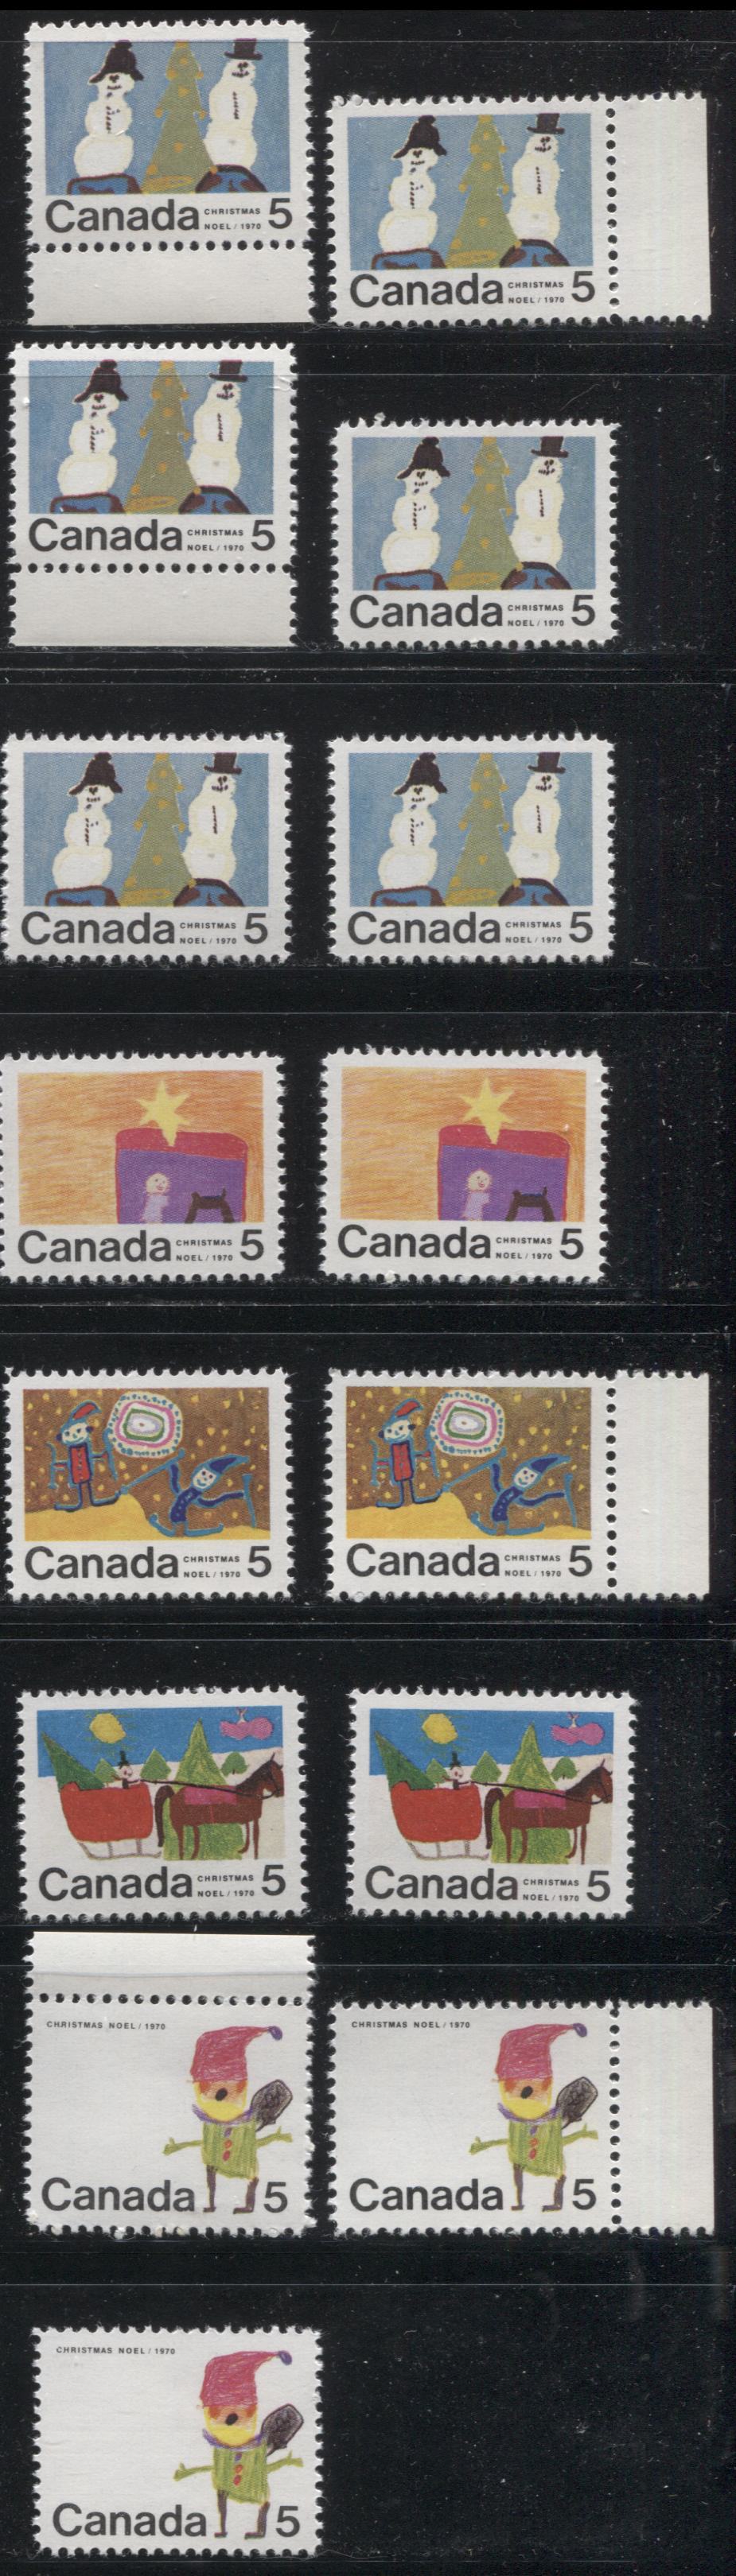 Lot 139 Canada #519-523 5c Multicoloured 1970 Christmas Issue, A Complete Set of 15 Constant Plate Varieties From Combination 3, Ribbed HB11 Paper, Perf. 11.9